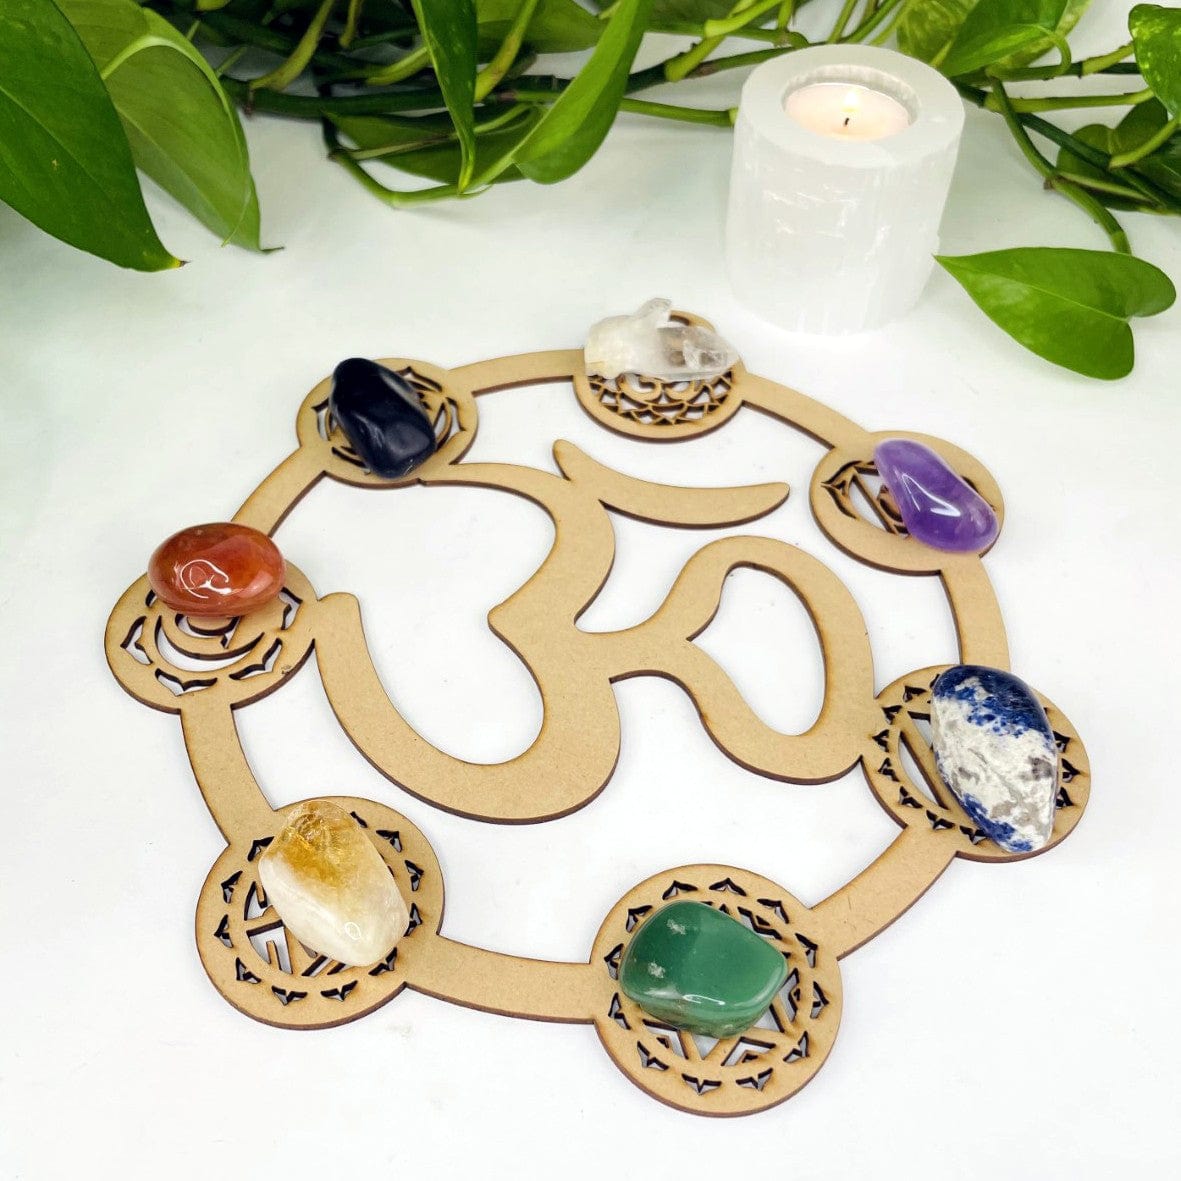 Wood Crystal Grid with seven chakra symbols on edges and OM symbol in the middle on a white background.  Seven chakra stones are placed on the chakra symbols